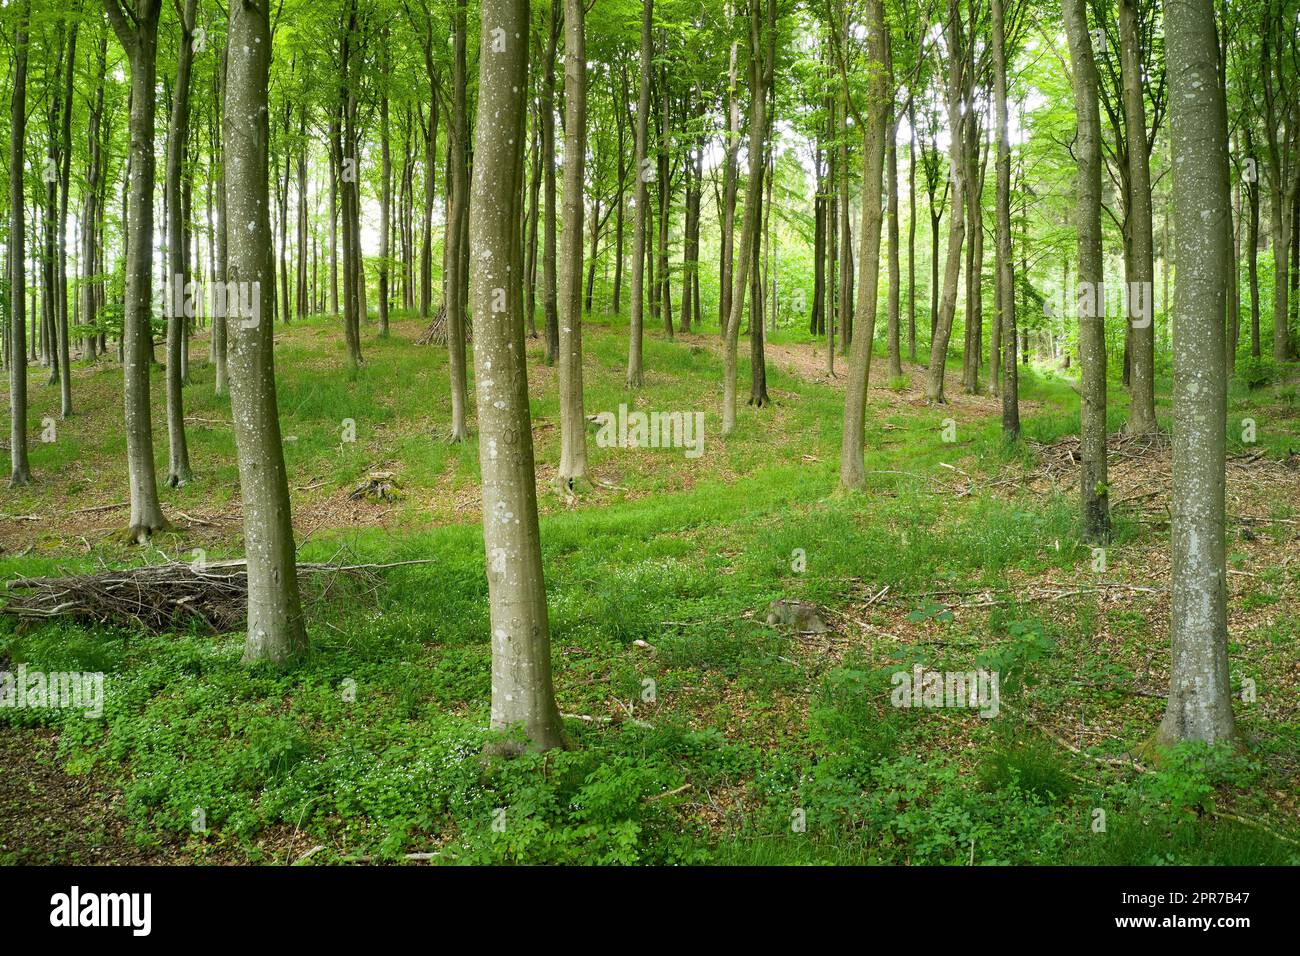 Blurred view of a secret and mysterious forest in the countryside leading to a magical forest where adventure awaits. Quiet scenery with hidden path surrounded by tall trees and grass Stock Photo